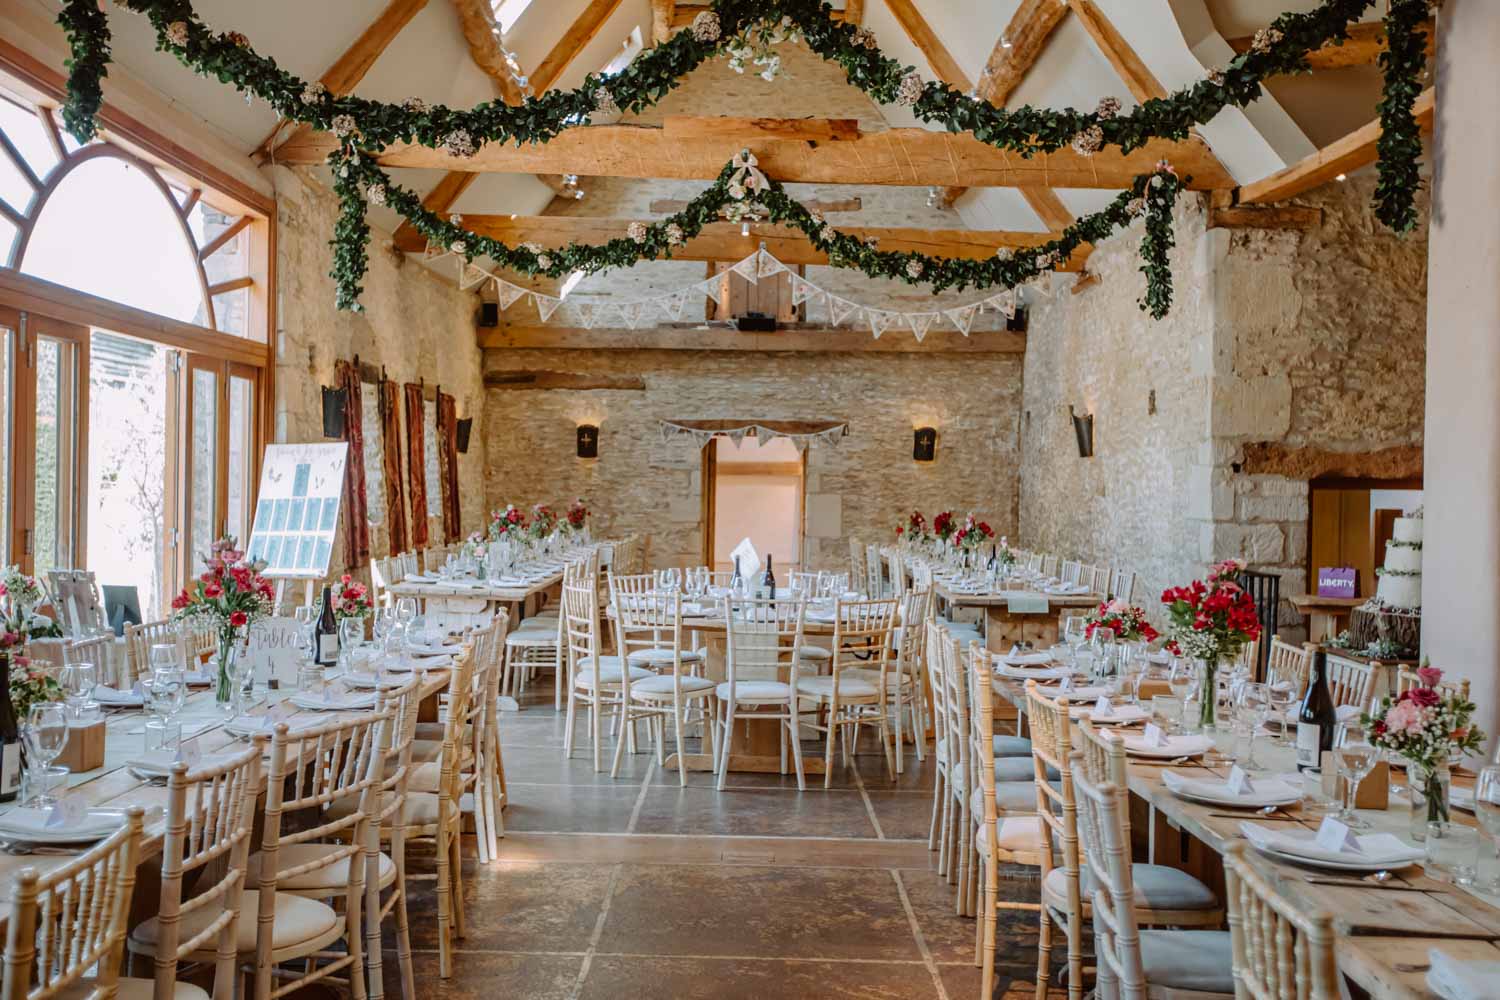 Oxleaze Barn wedding breakfast beautifully decorated main barn with flower decorations